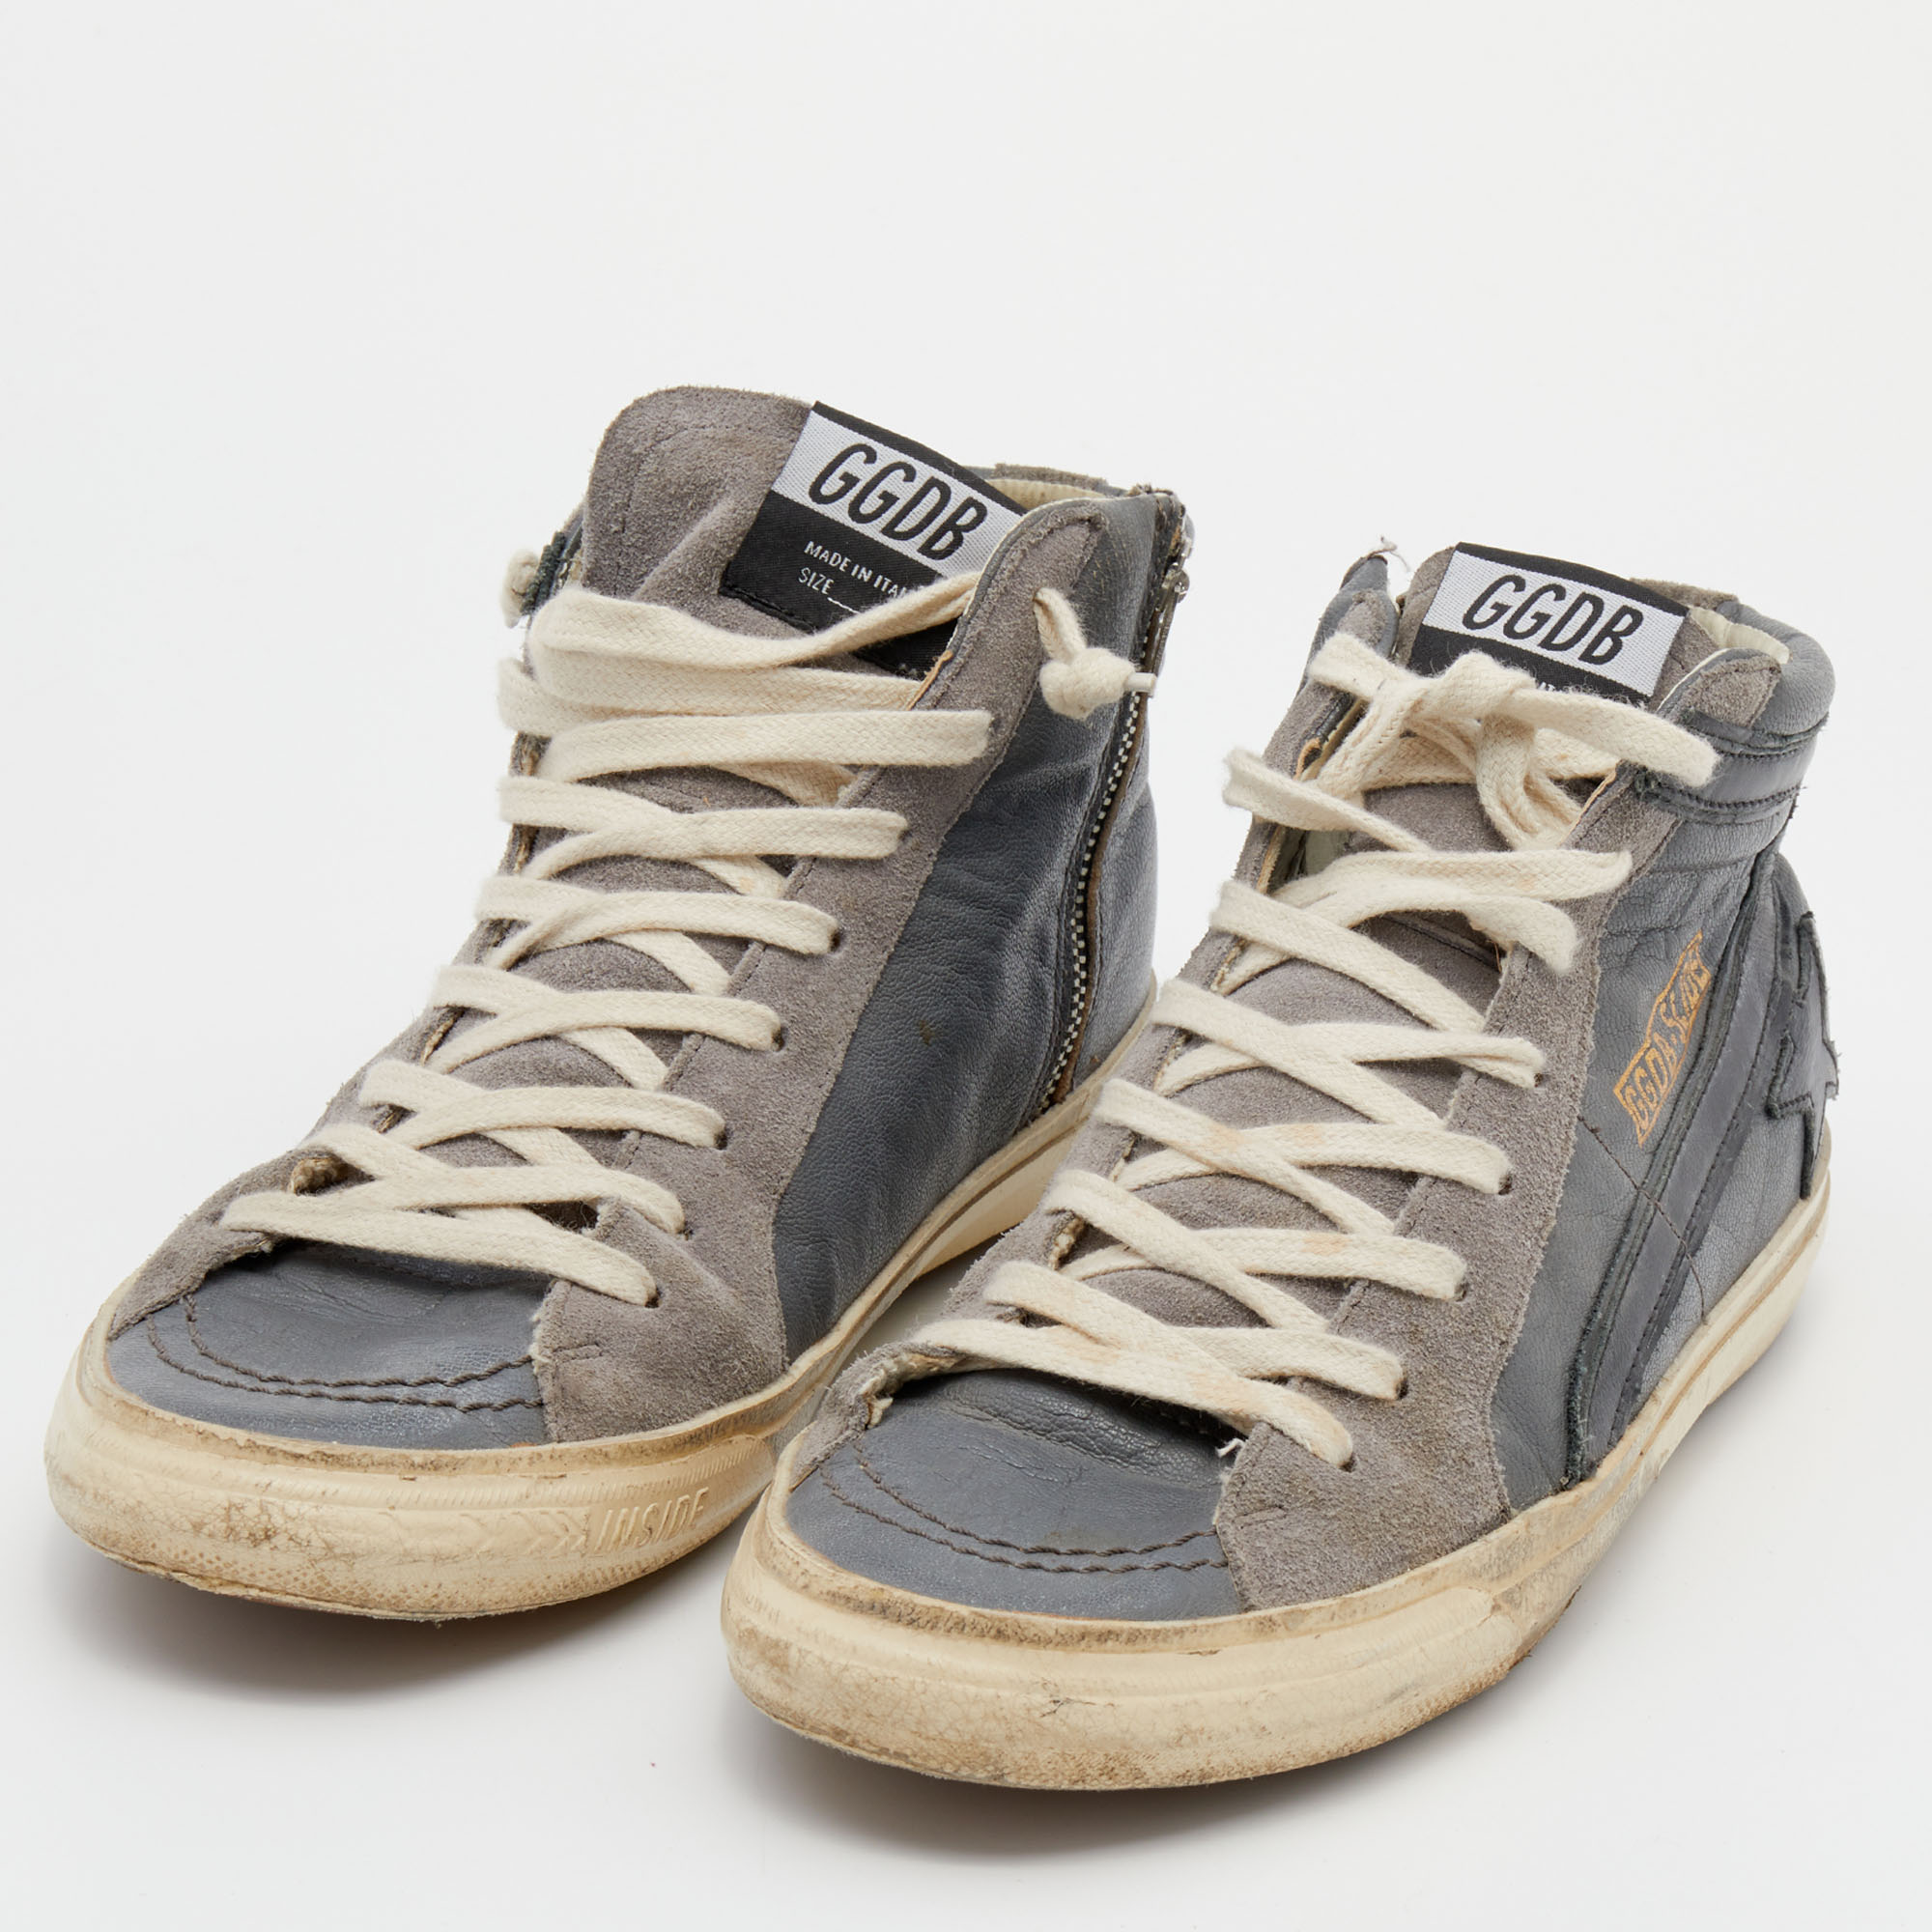 

Golden Goose Grey Suede And Leather Slide High Top Sneakers Size